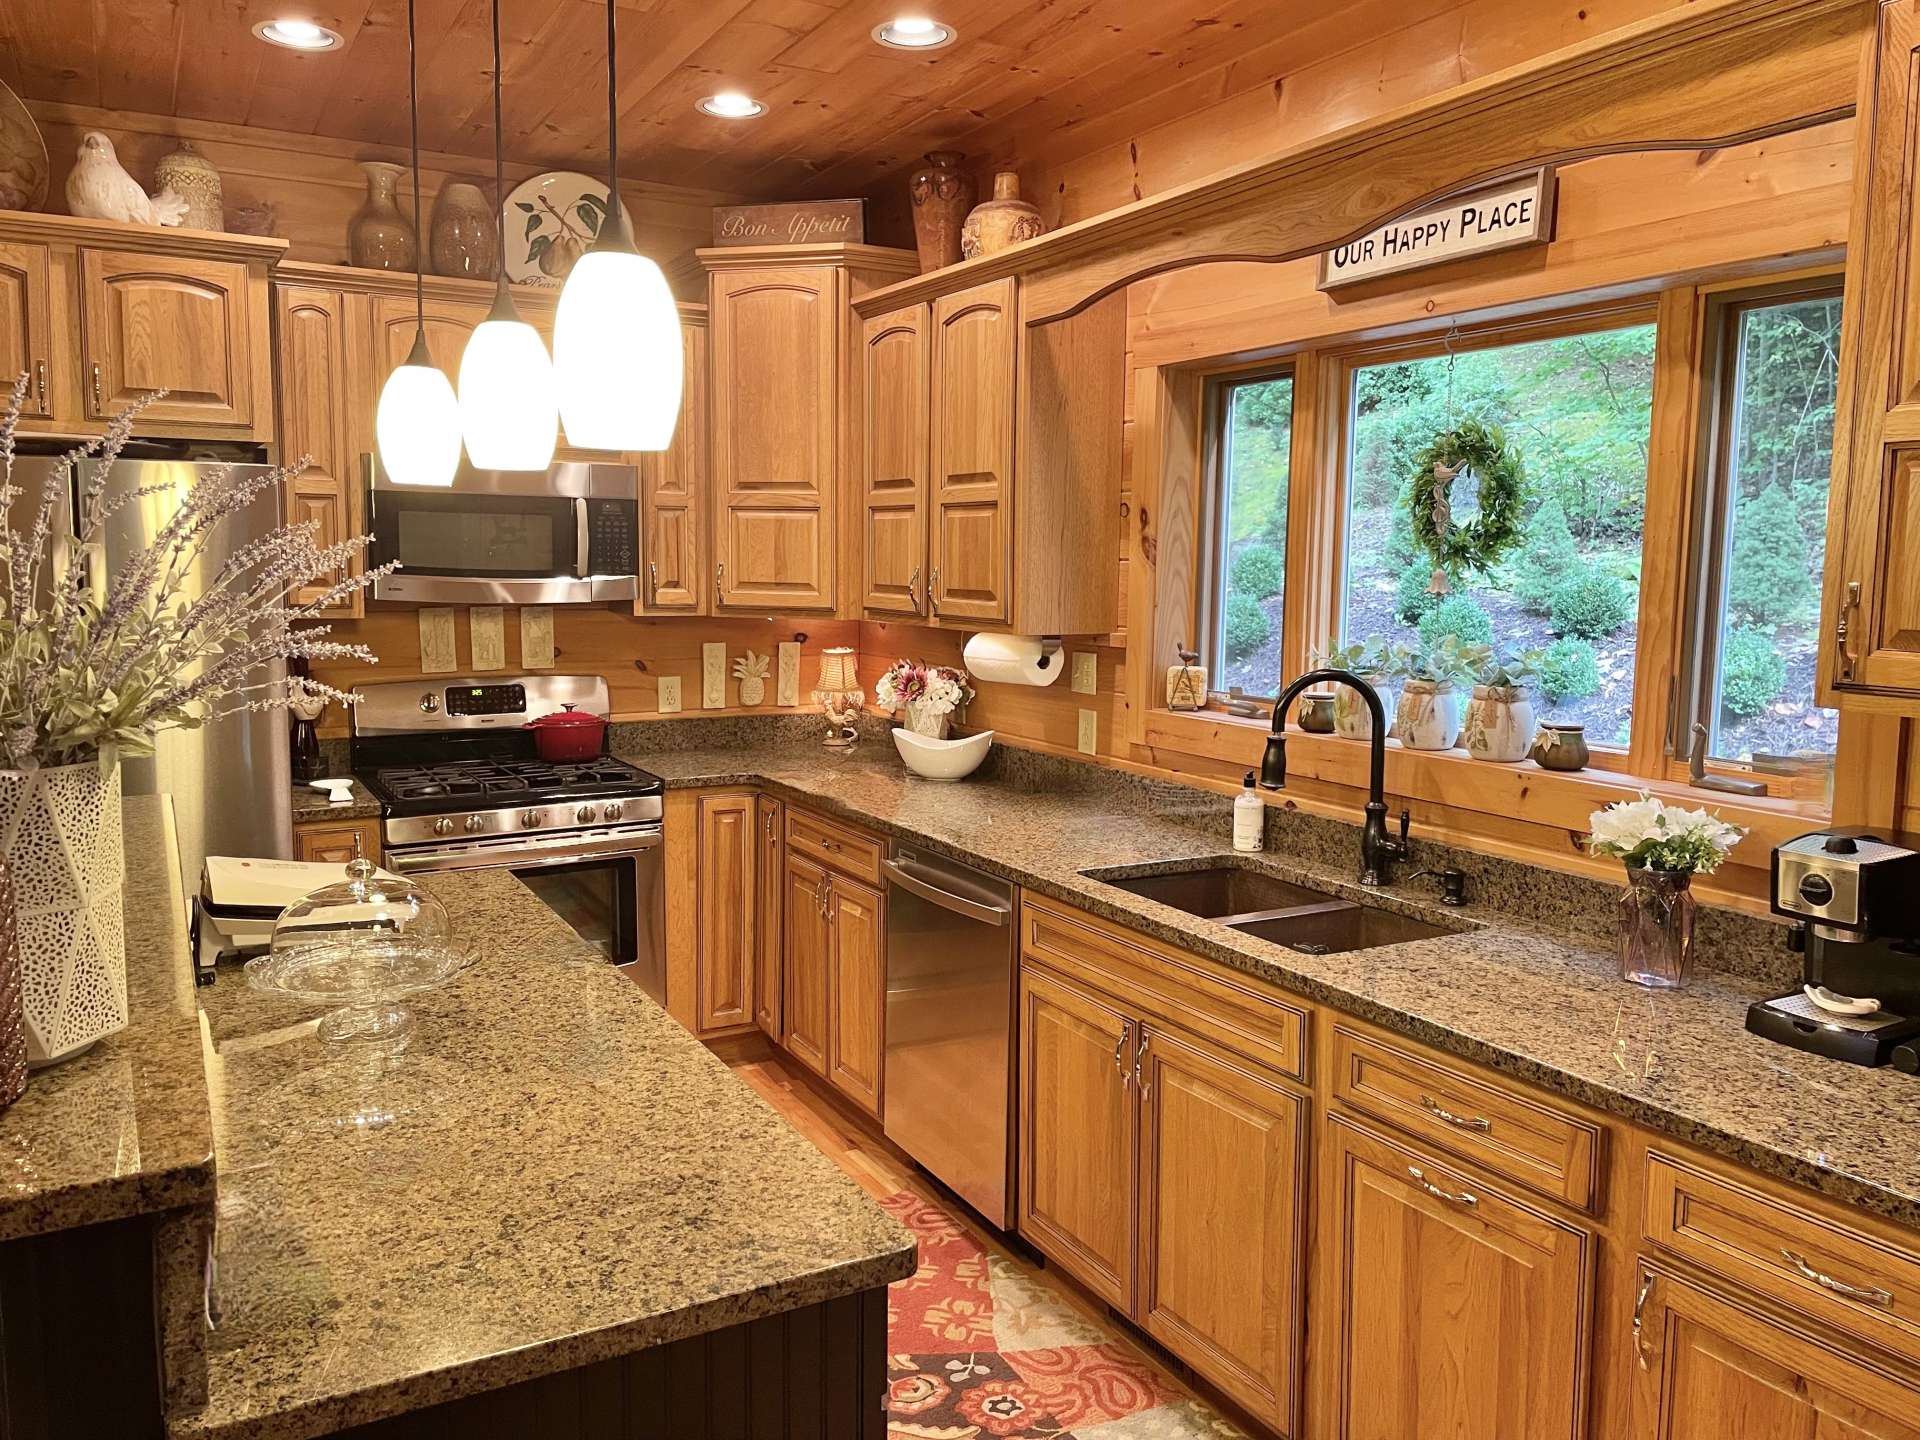 Kitchen with granite countertops and stainless appliances.